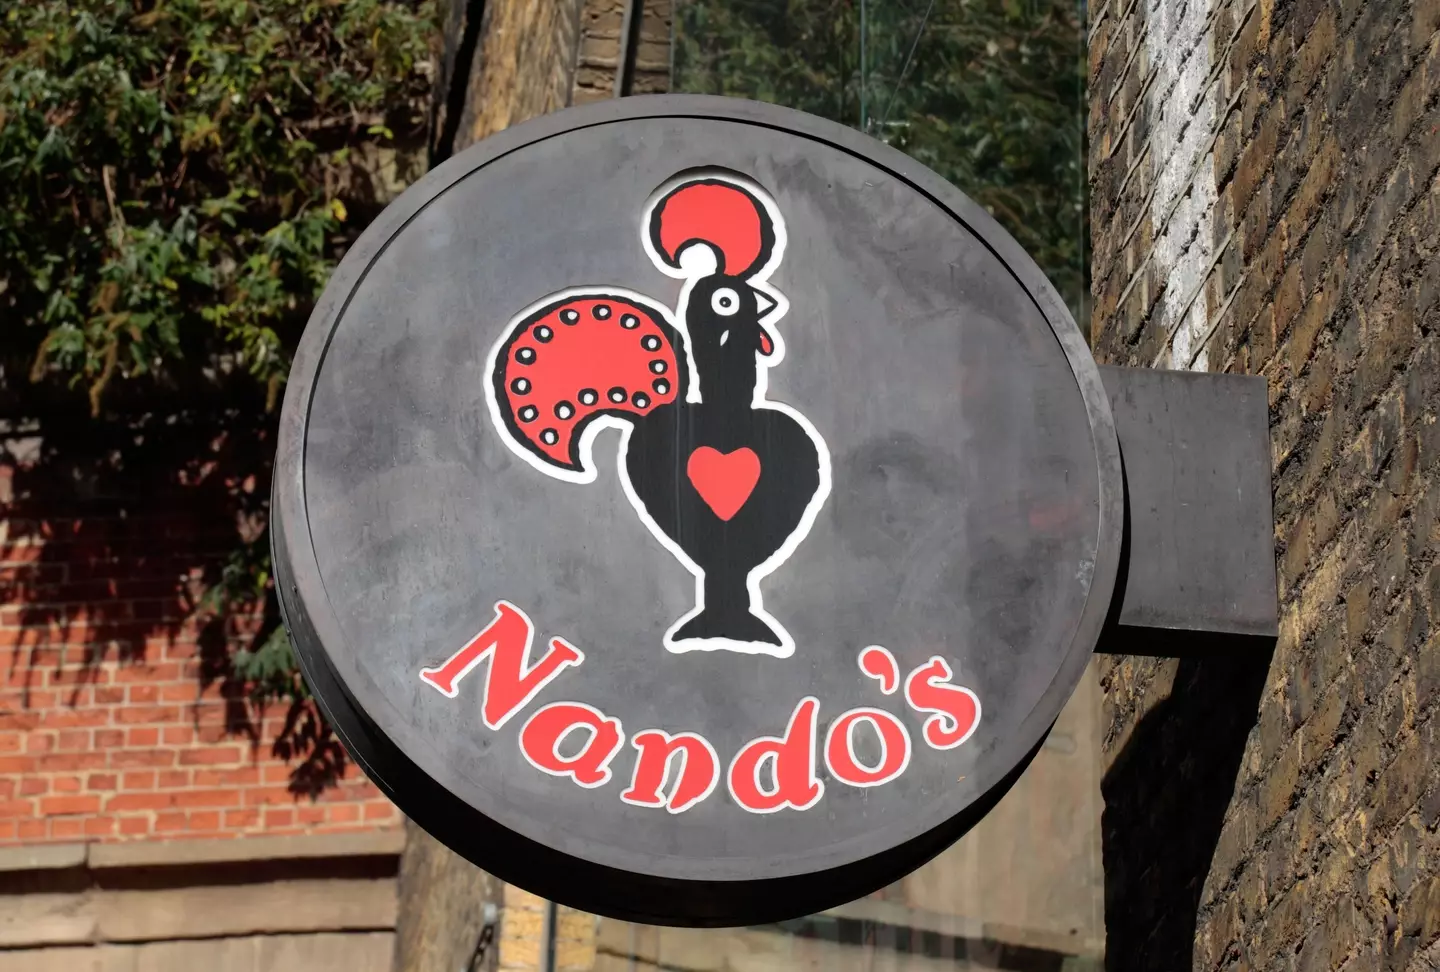 What's missing from Nando's menu?